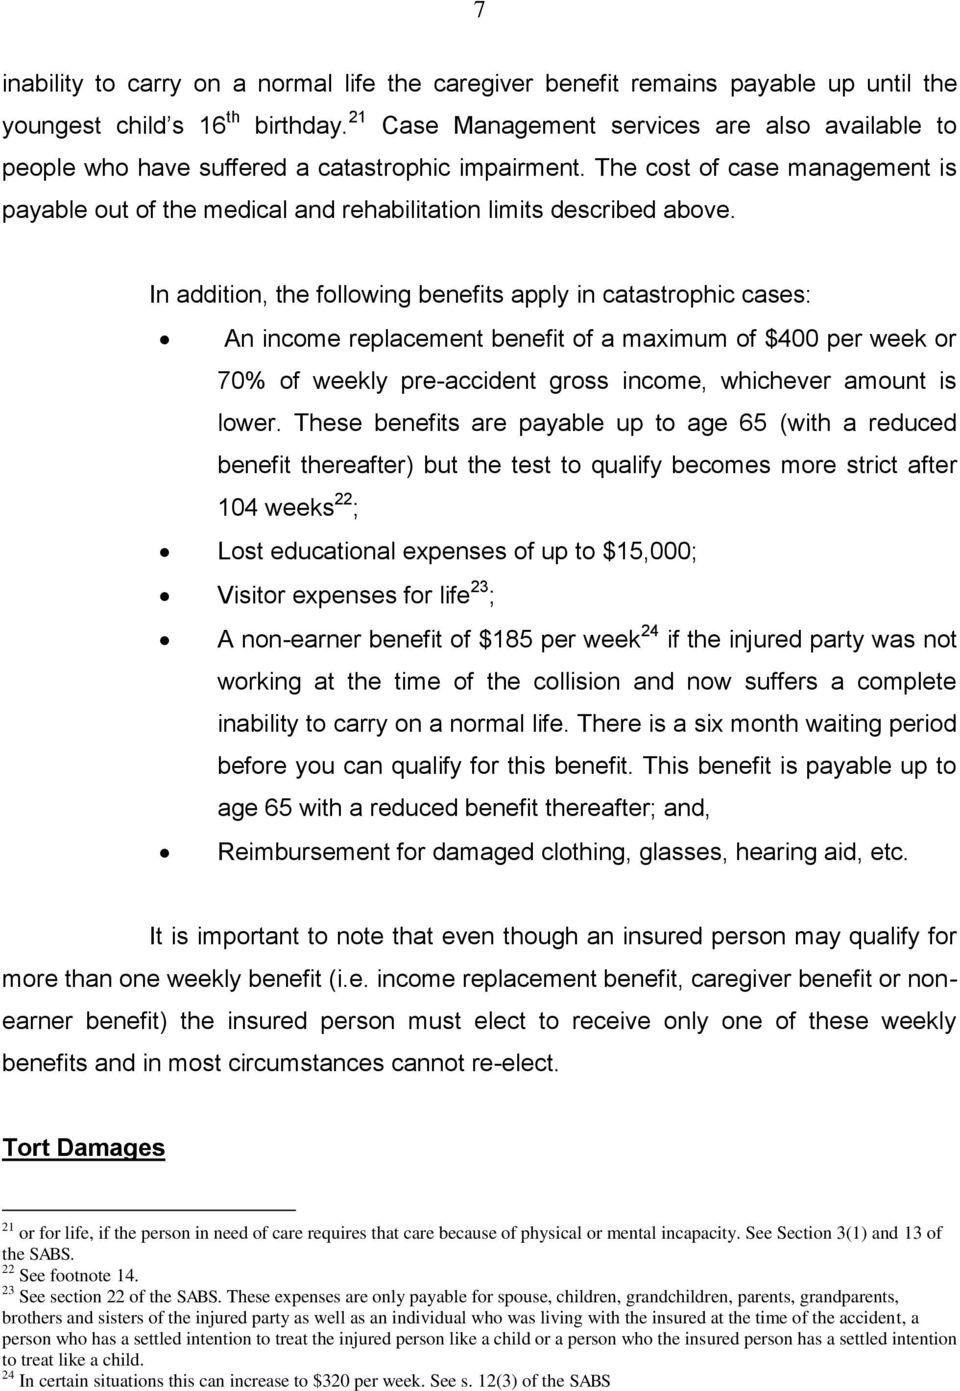 The cost of case management is payable out of the medical and rehabilitation limits described above.